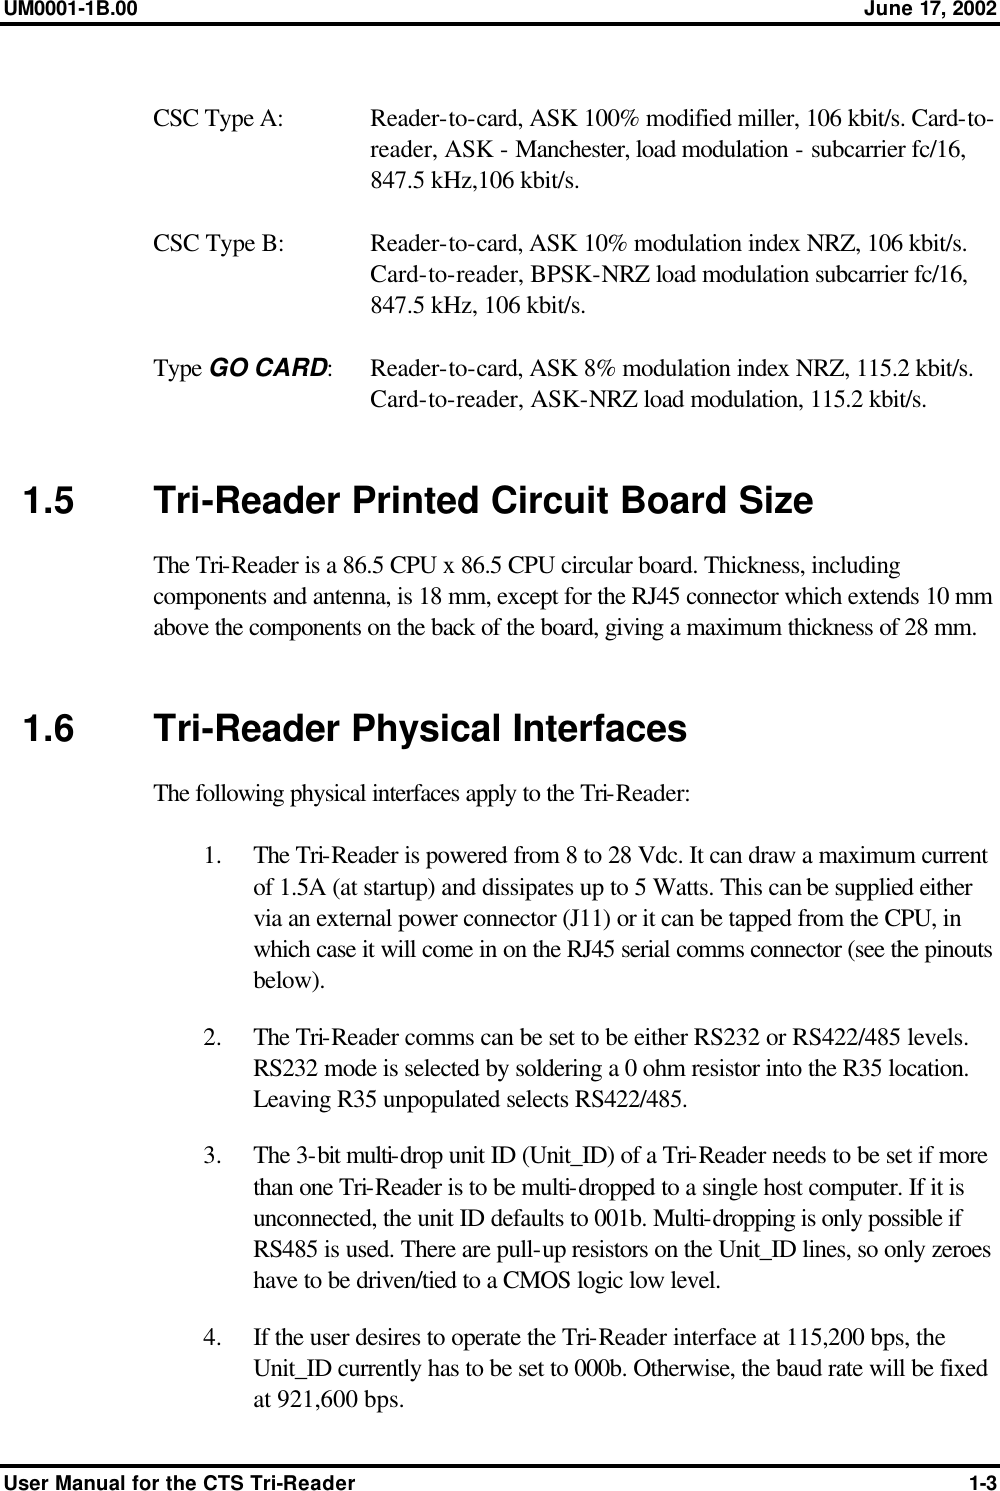 UM0001-1B.00 June 17, 2002 User Manual for the CTS Tri-Reader 1-3  CSC Type A:  Reader-to-card, ASK 100% modified miller, 106 kbit/s. Card-to-reader, ASK - Manchester, load modulation - subcarrier fc/16, 847.5 kHz,106 kbit/s.  CSC Type B: Reader-to-card, ASK 10% modulation index NRZ, 106 kbit/s. Card-to-reader, BPSK-NRZ load modulation subcarrier fc/16, 847.5 kHz, 106 kbit/s.  Type GO CARD: Reader-to-card, ASK 8% modulation index NRZ, 115.2 kbit/s. Card-to-reader, ASK-NRZ load modulation, 115.2 kbit/s.   1.5 Tri-Reader Printed Circuit Board Size The Tri-Reader is a 86.5 CPU x 86.5 CPU circular board. Thickness, including components and antenna, is 18 mm, except for the RJ45 connector which extends 10 mm above the components on the back of the board, giving a maximum thickness of 28 mm.   1.6 Tri-Reader Physical Interfaces The following physical interfaces apply to the Tri-Reader:  1.  The Tri-Reader is powered from 8 to 28 Vdc. It can draw a maximum current of 1.5A (at startup) and dissipates up to 5 Watts. This can be supplied either via an external power connector (J11) or it can be tapped from the CPU, in which case it will come in on the RJ45 serial comms connector (see the pinouts below). 2.  The Tri-Reader comms can be set to be either RS232 or RS422/485 levels. RS232 mode is selected by soldering a 0 ohm resistor into the R35 location. Leaving R35 unpopulated selects RS422/485. 3.  The 3-bit multi-drop unit ID (Unit_ID) of a Tri-Reader needs to be set if more than one Tri-Reader is to be multi-dropped to a single host computer. If it is unconnected, the unit ID defaults to 001b. Multi-dropping is only possible if RS485 is used. There are pull-up resistors on the Unit_ID lines, so only zeroes have to be driven/tied to a CMOS logic low level. 4.  If the user desires to operate the Tri-Reader interface at 115,200 bps, the Unit_ID currently has to be set to 000b. Otherwise, the baud rate will be fixed at 921,600 bps. 